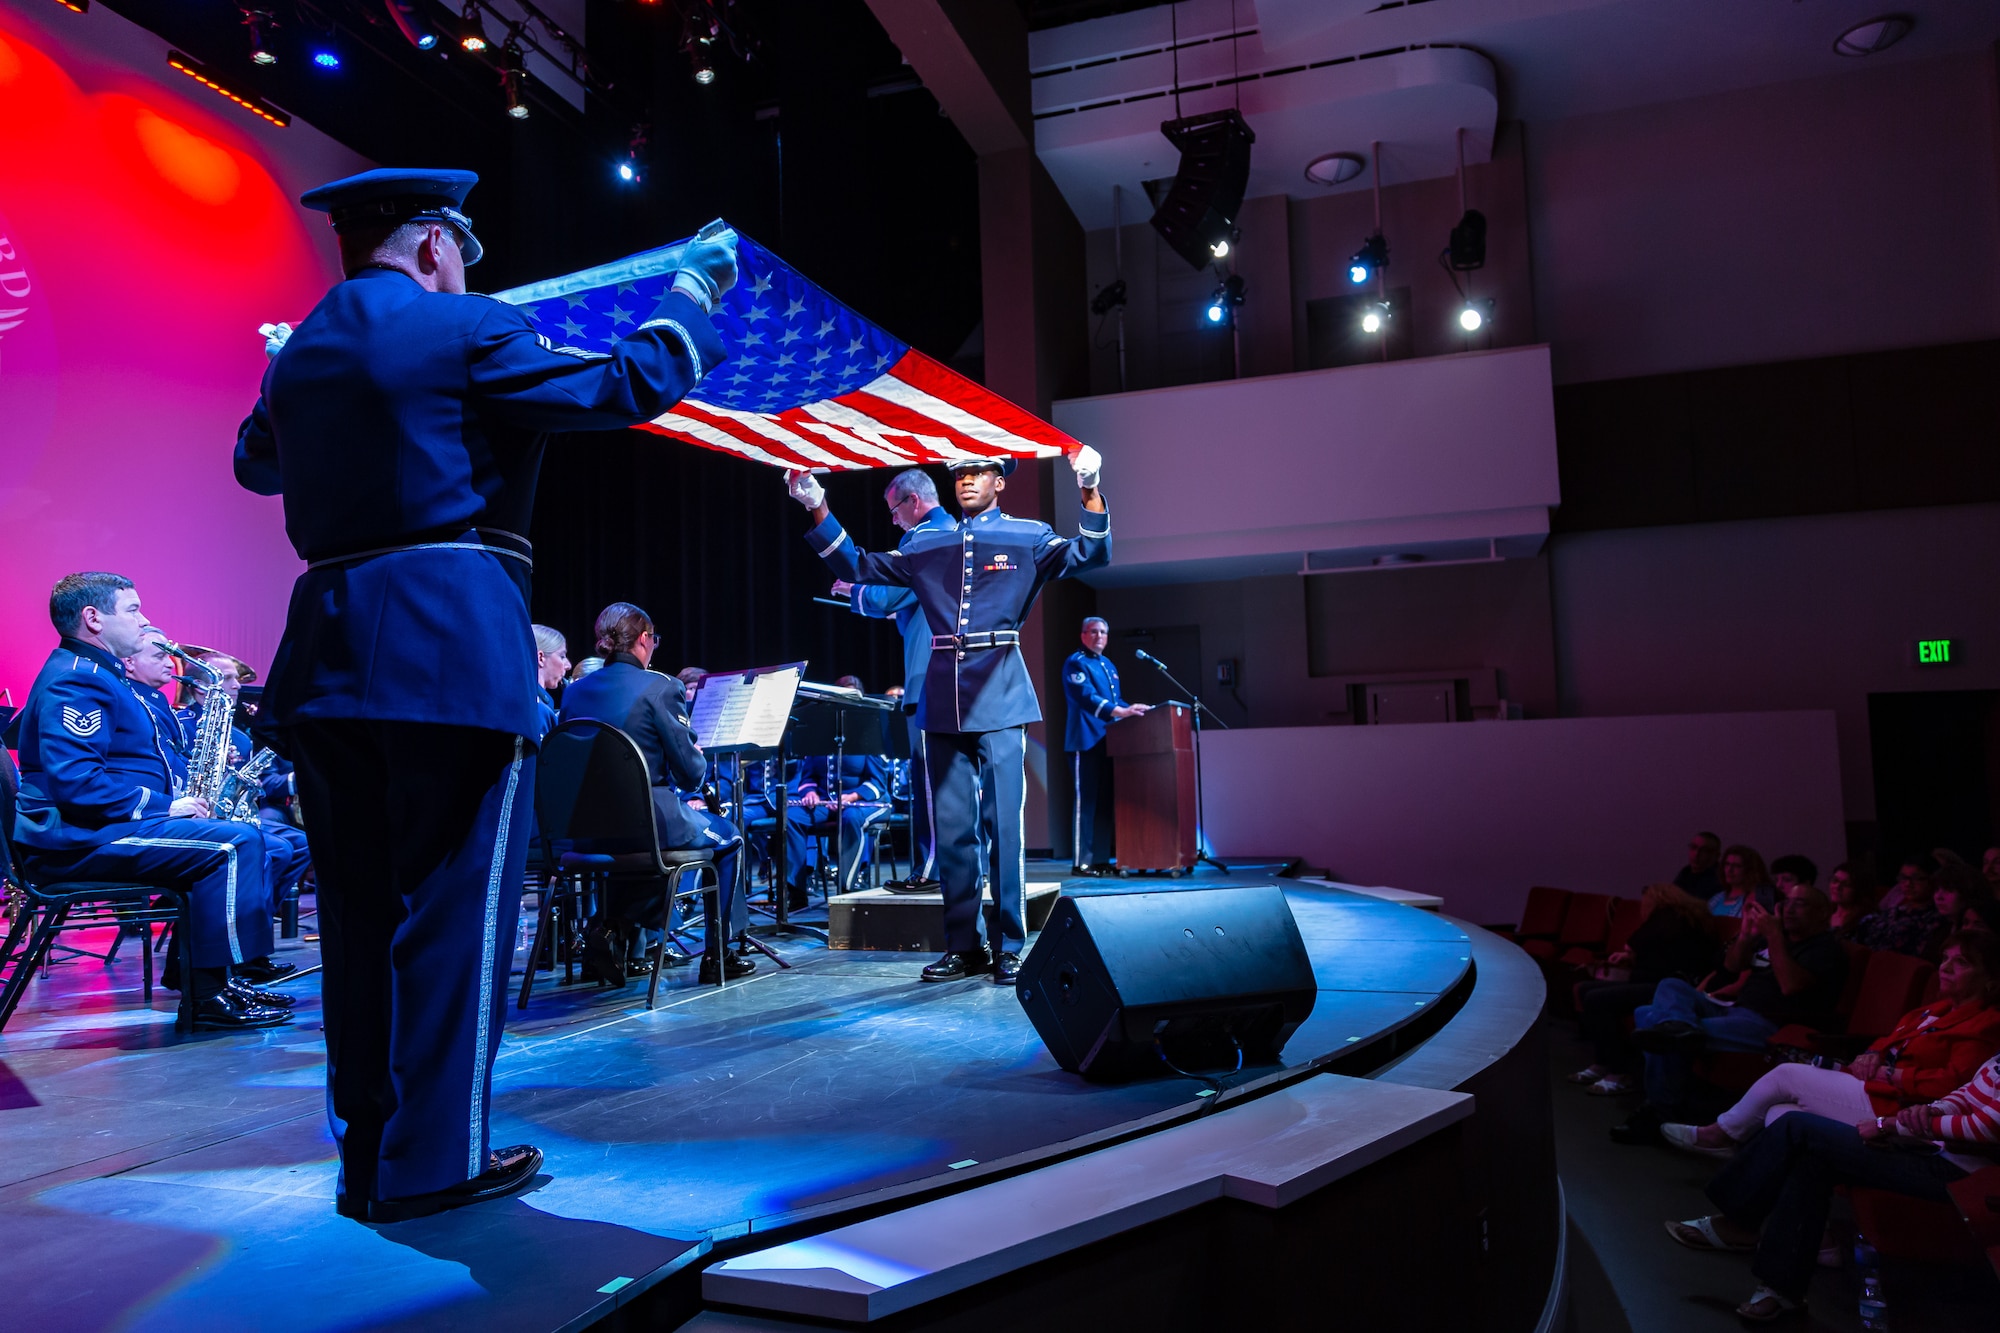 CMSgt Steve Burdick and SSgt Tony Watson begin a flag folding ceremony during a 2018 performance by the ANG Band of the South's Concert Band